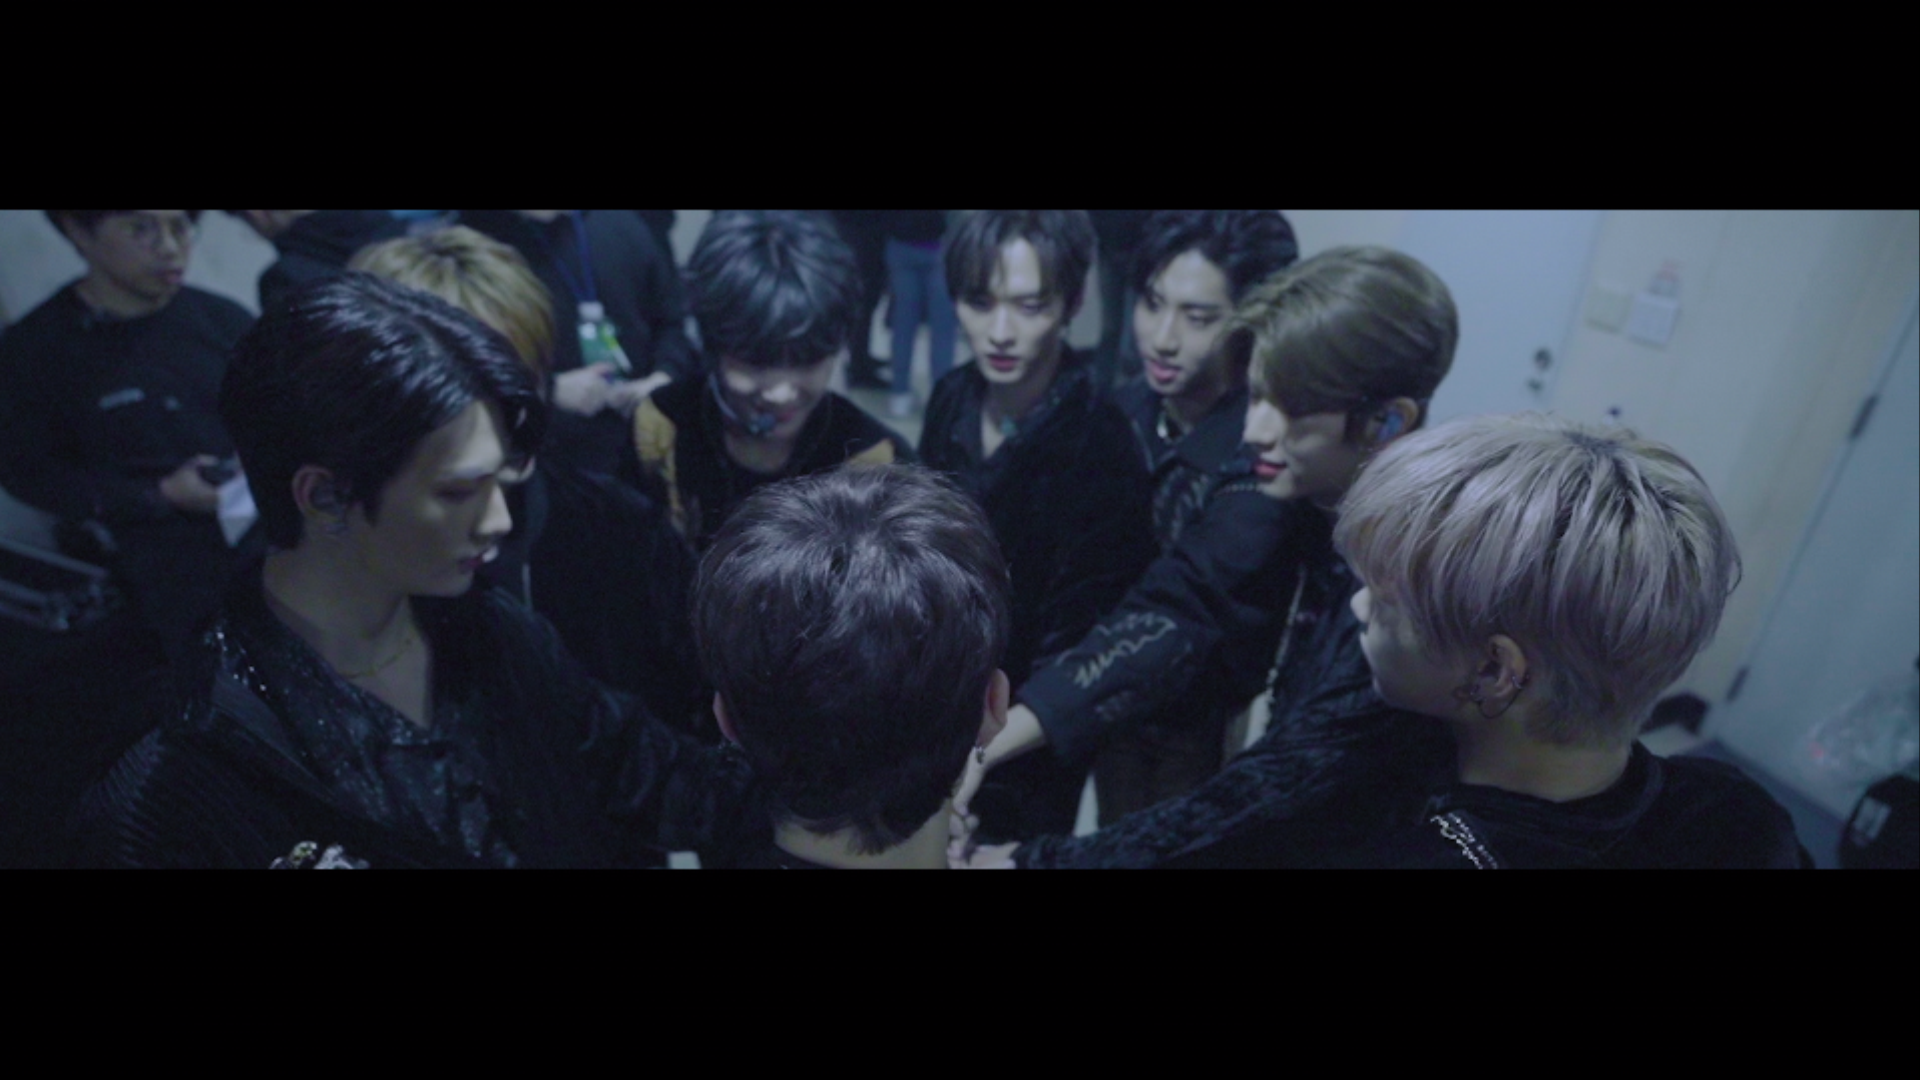 Stray Kids(스트레이 키즈) "You Can STAY" Video